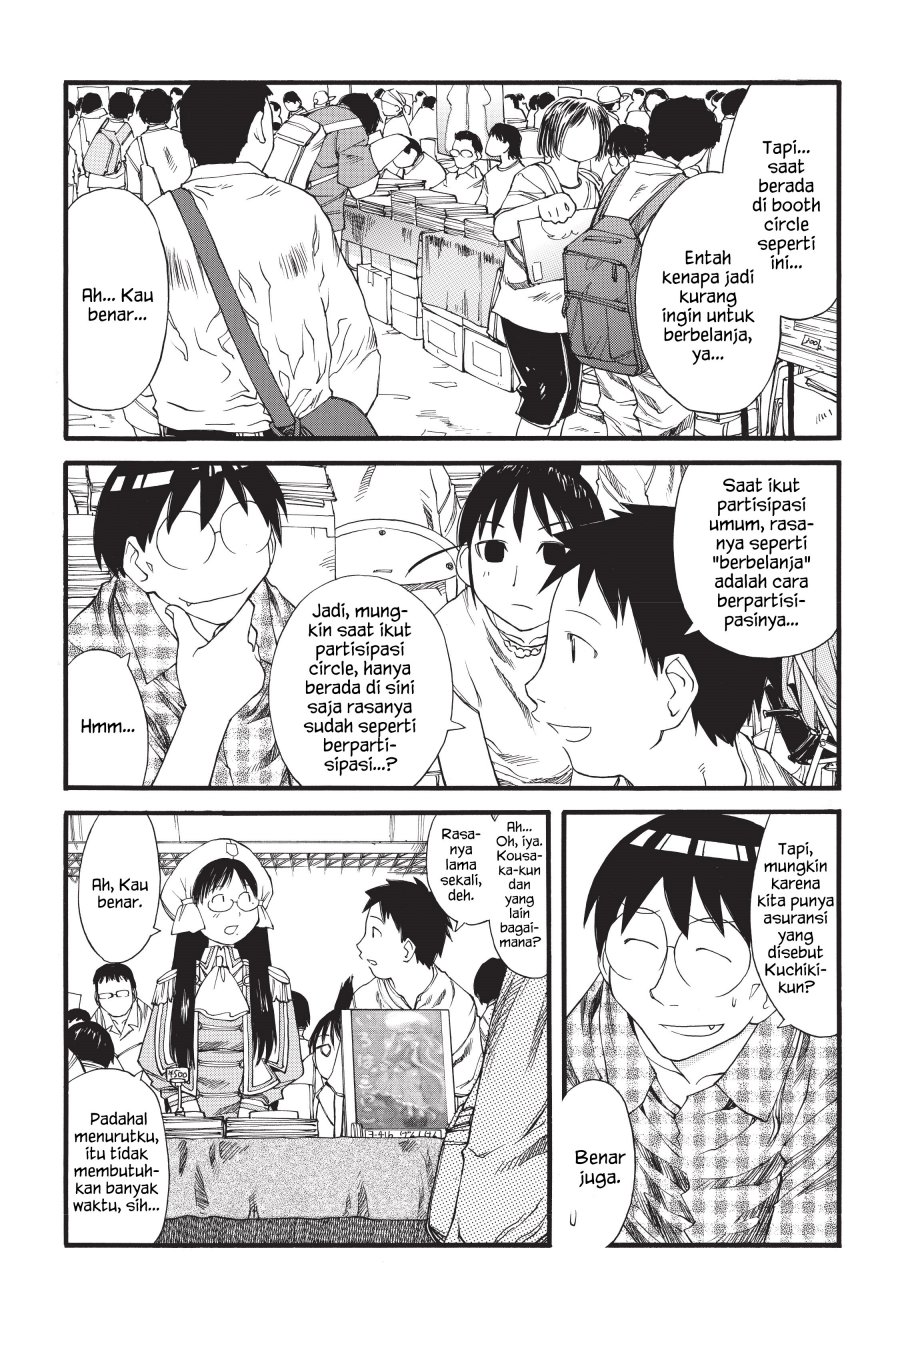 Genshiken – The Society for the Study of Modern Visual Culture Chapter 30 Image 2